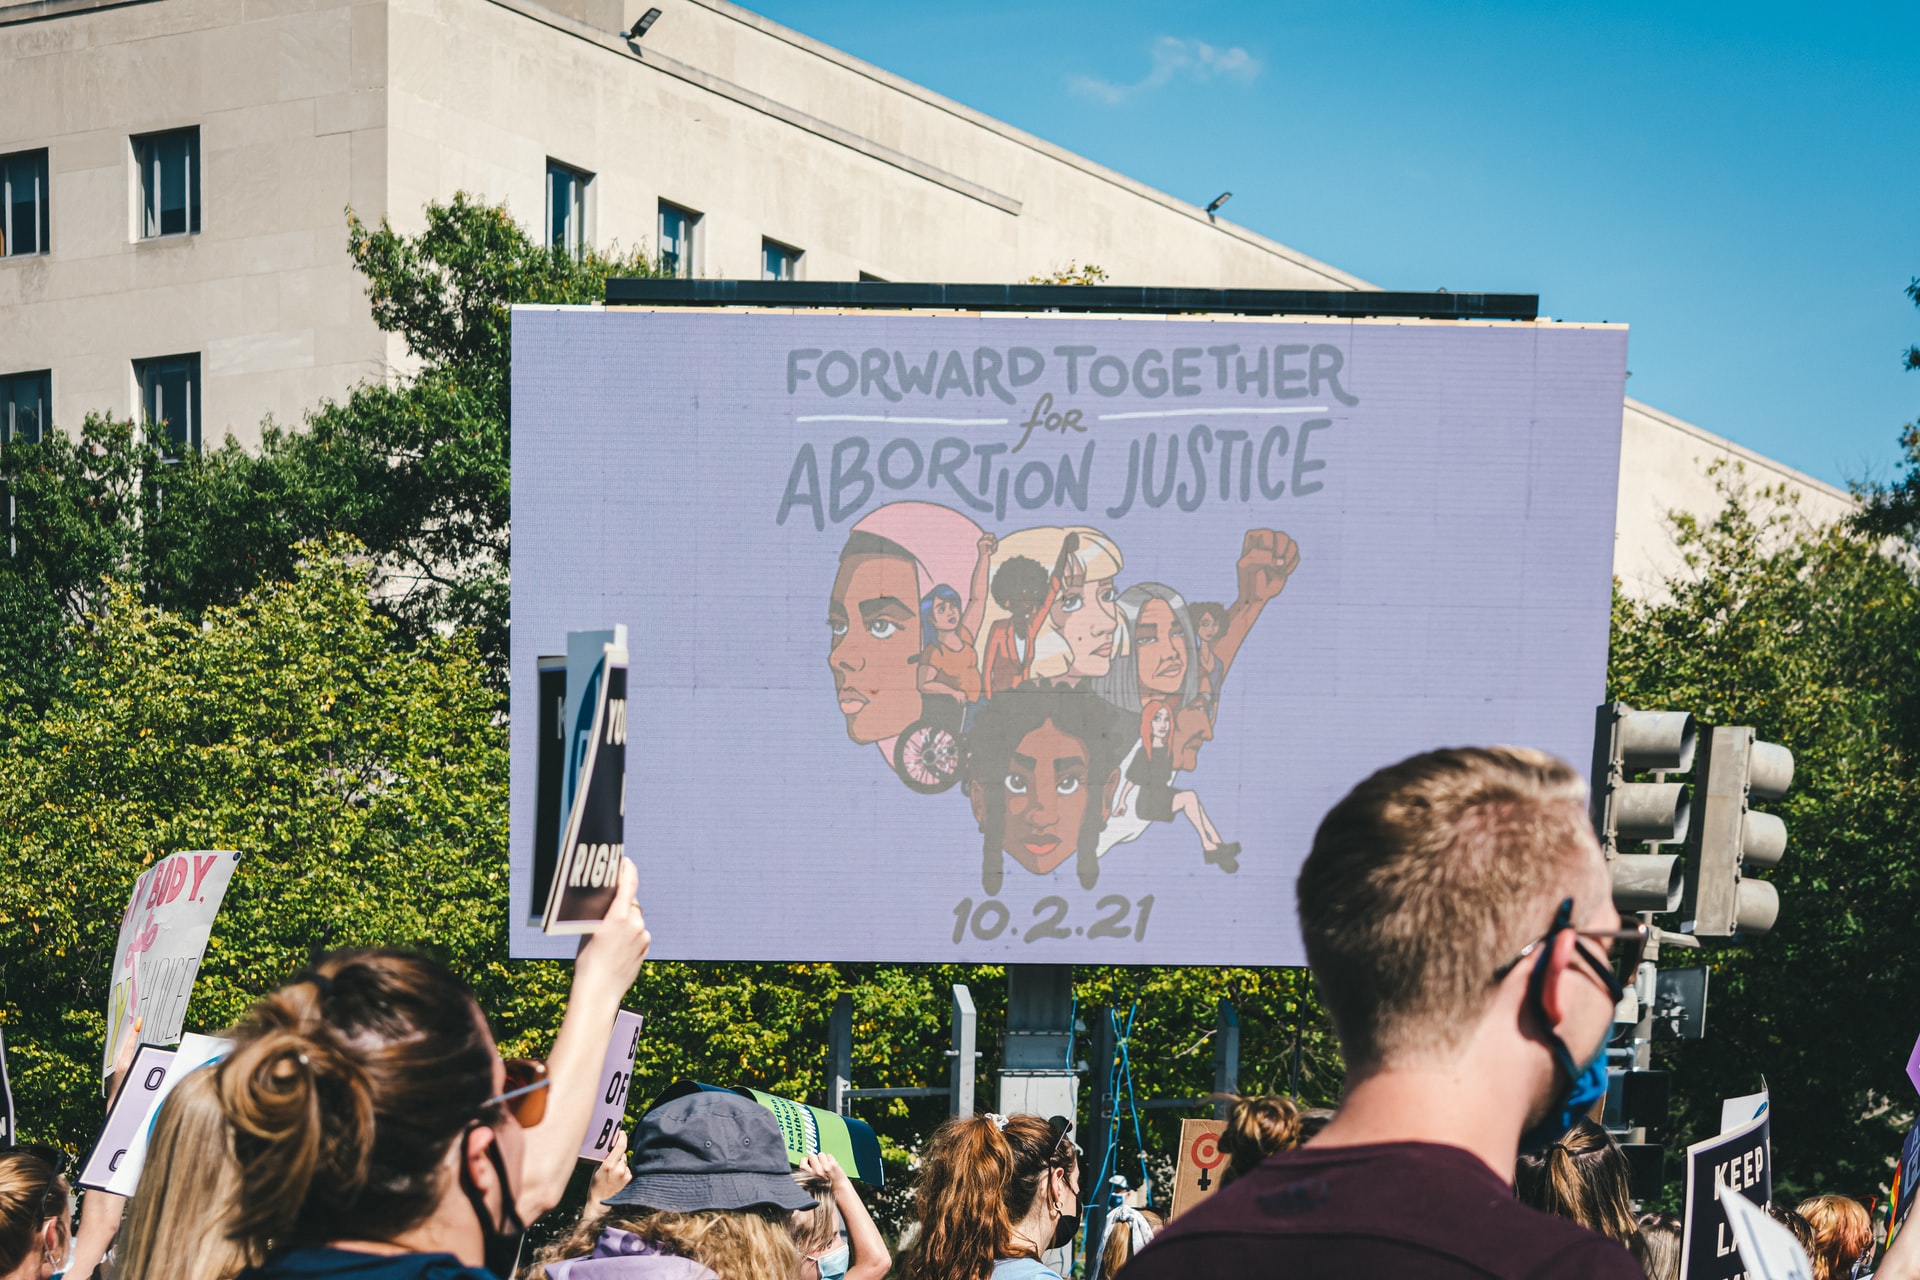 Demonstrators march for abortion justice